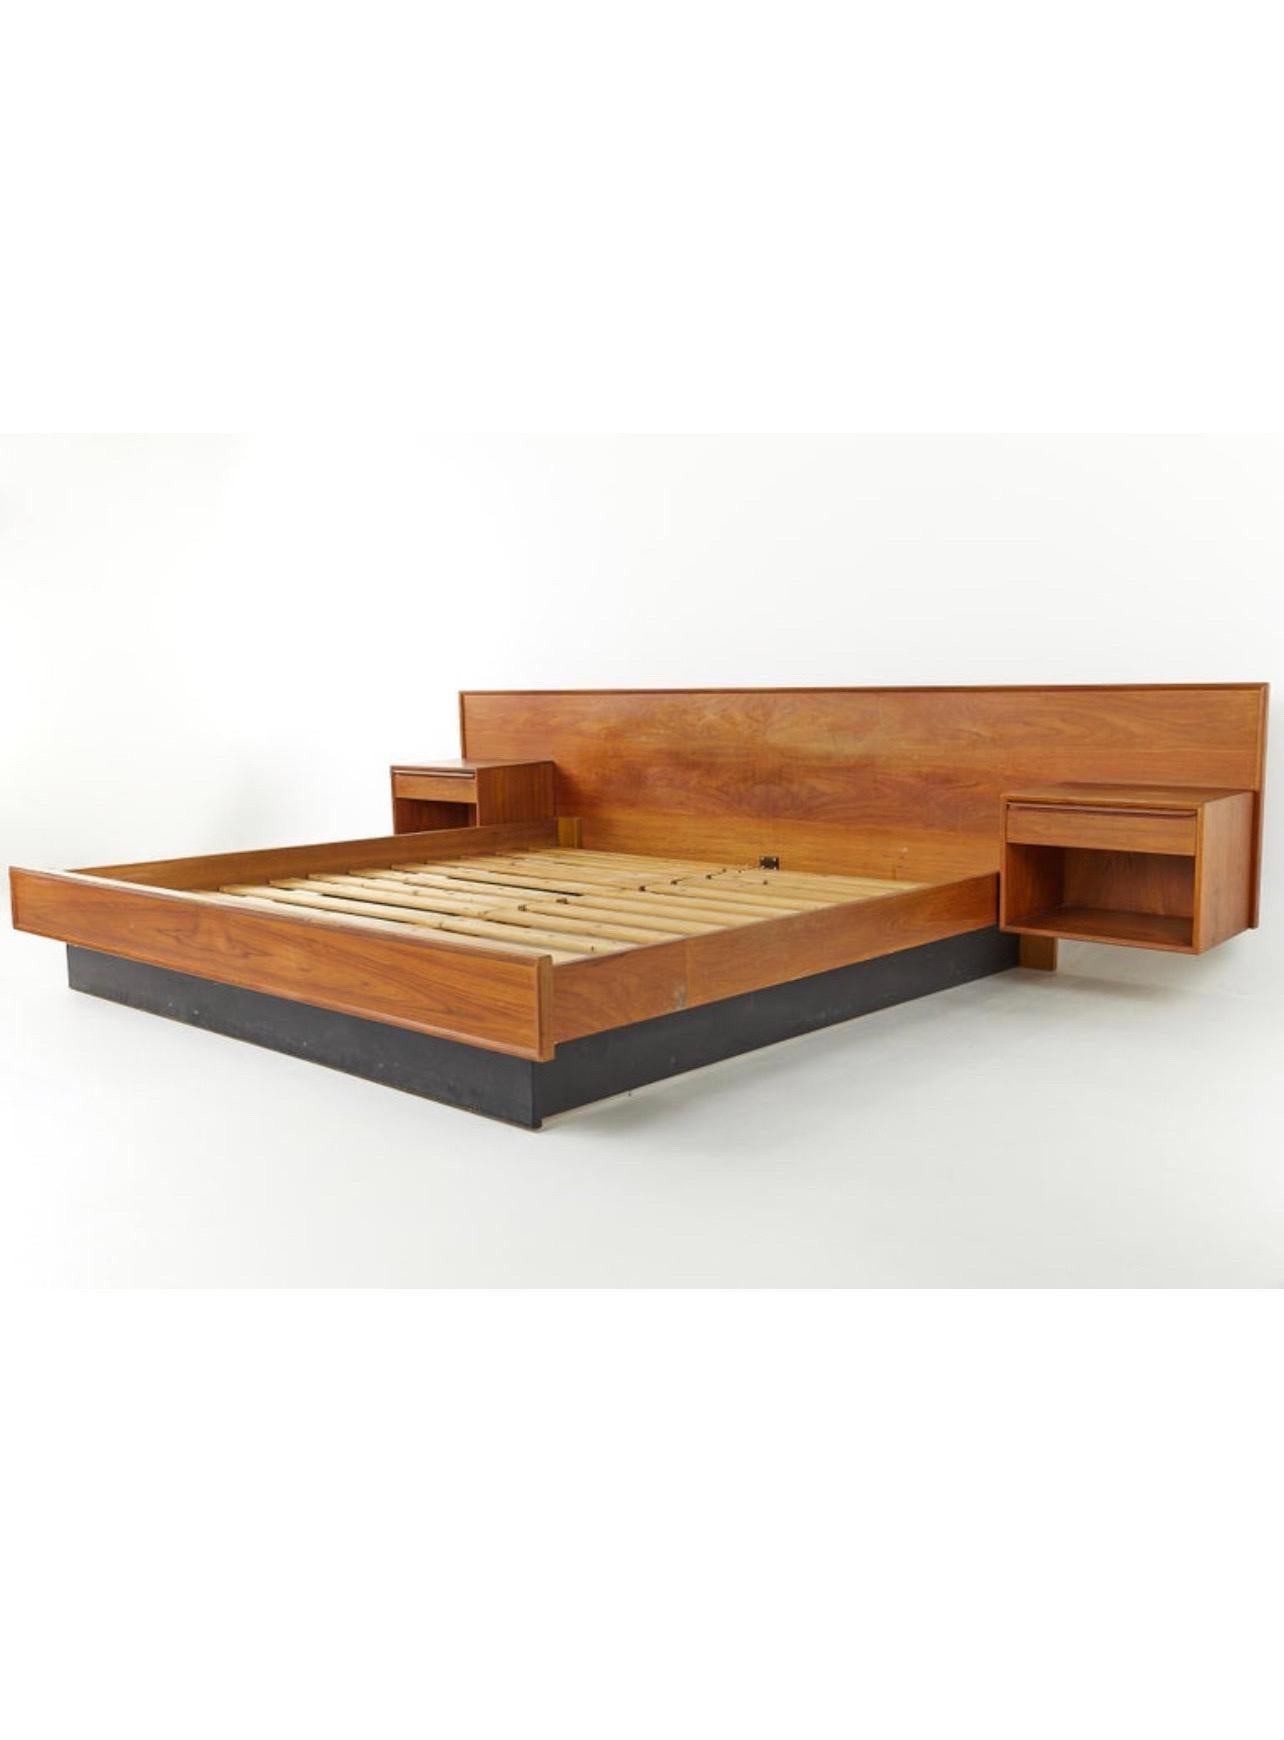 Beautiful striking Danish Modern Teak bed by Westnofa, made in Norway circa 1970's nice condition we have cleaned and oiled the piece this bed makes any room stand out place simple elegant minimalist design. King size is hard to find.